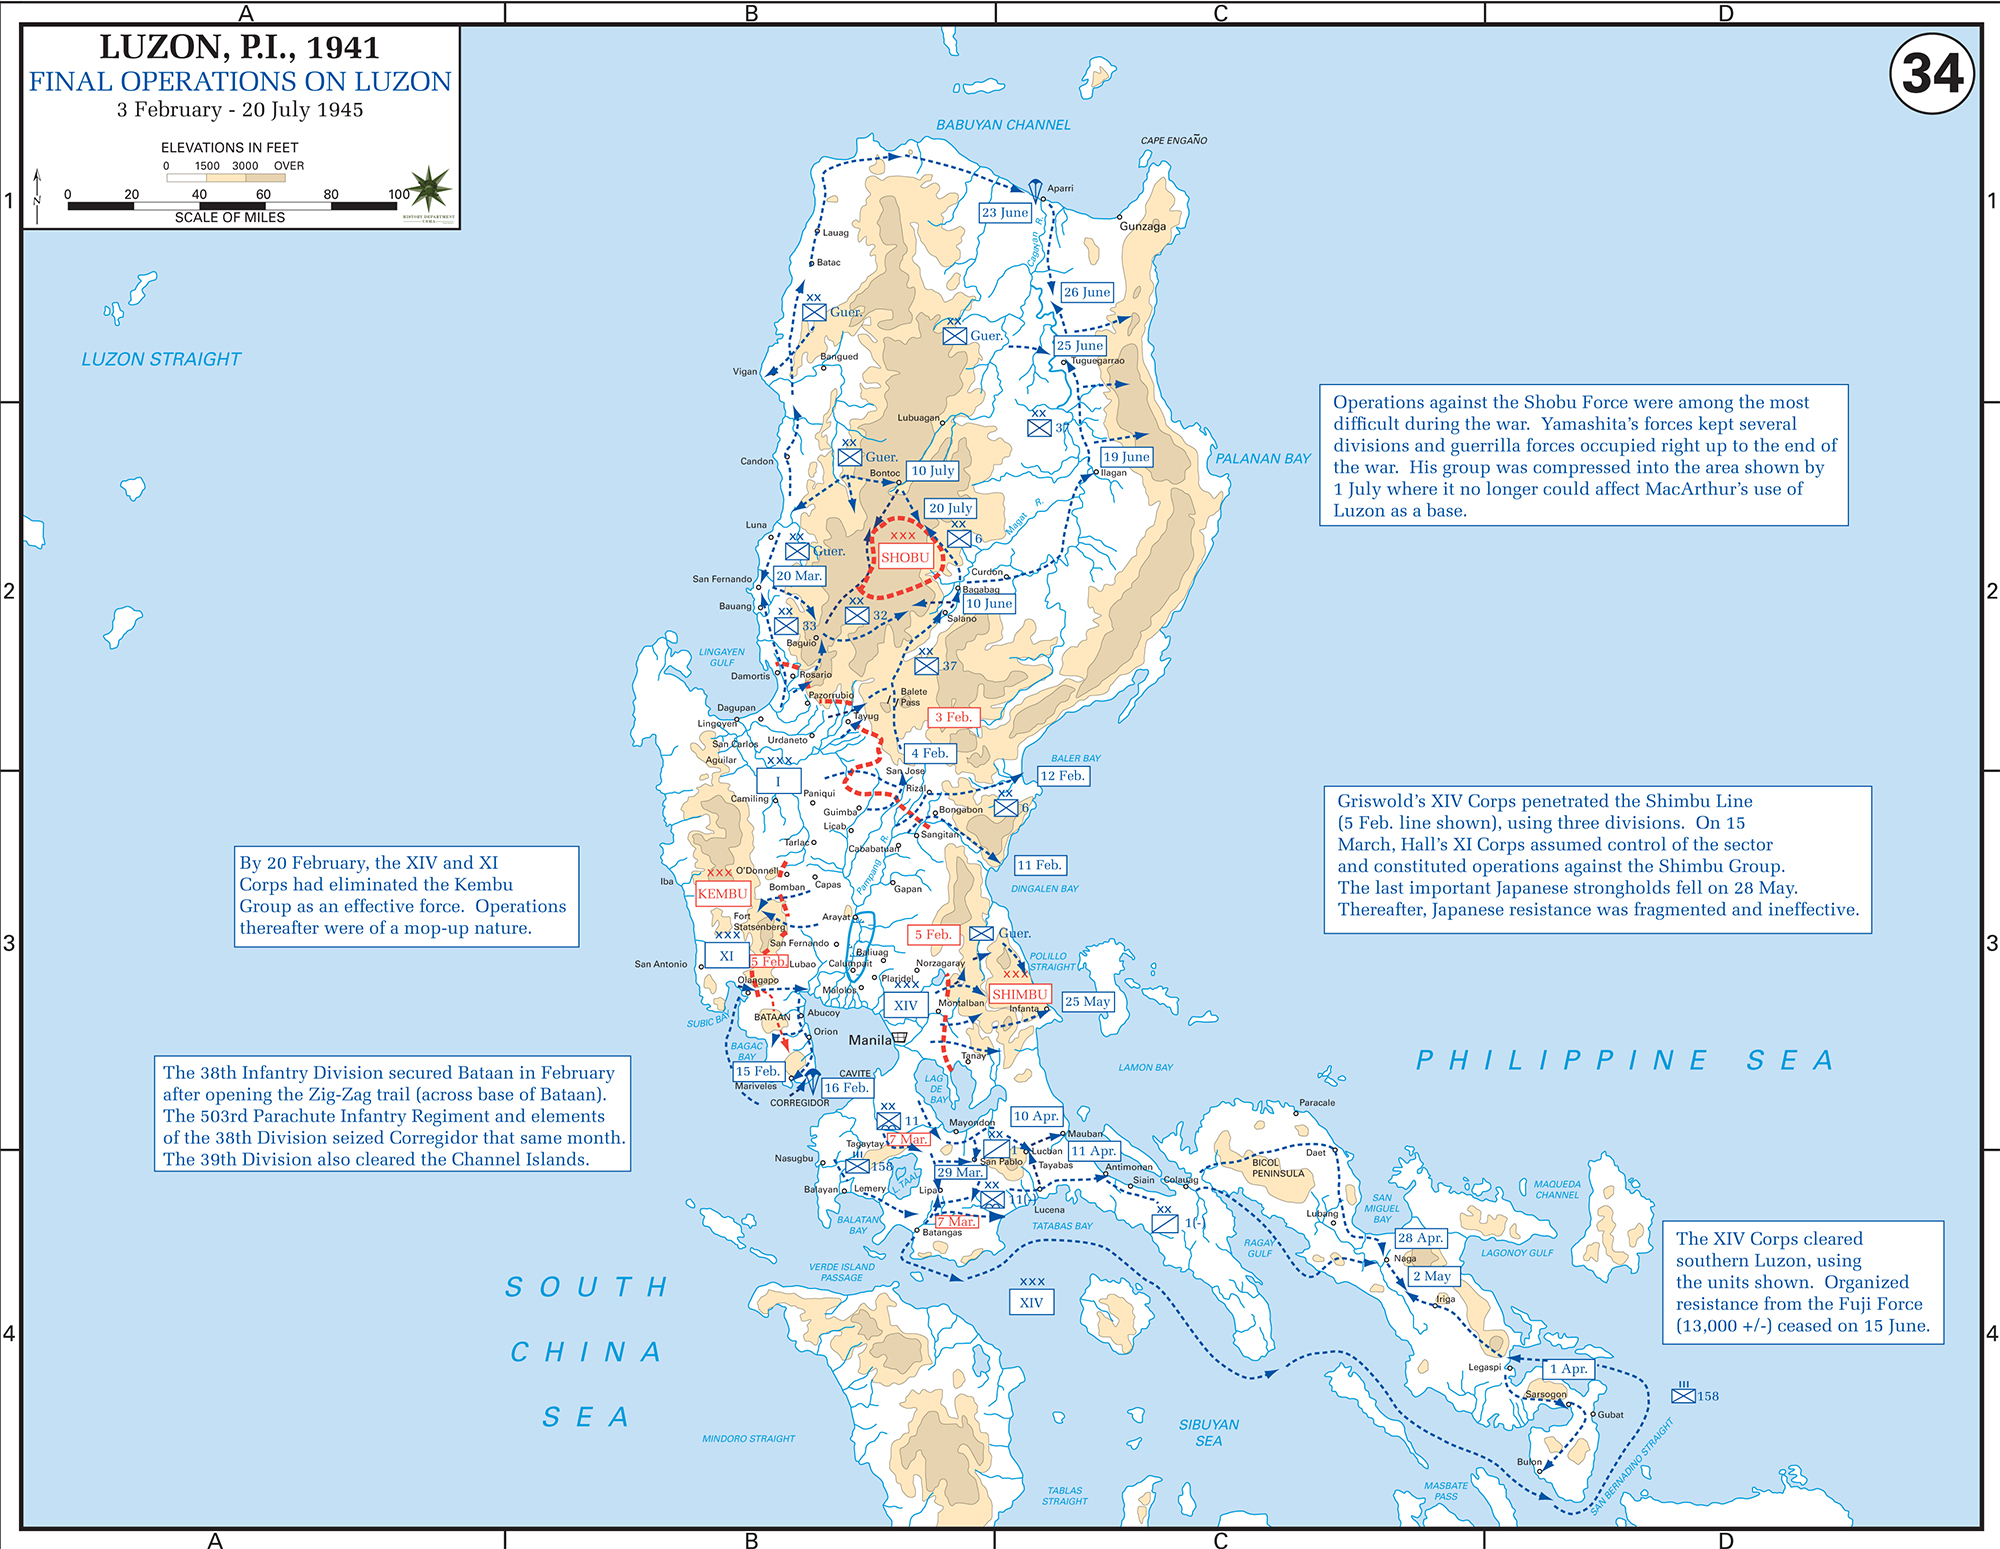 Map of World War II: The Philippine Islands, Luzon. Final Operations on Luzon February 3 - July 20, 1945.